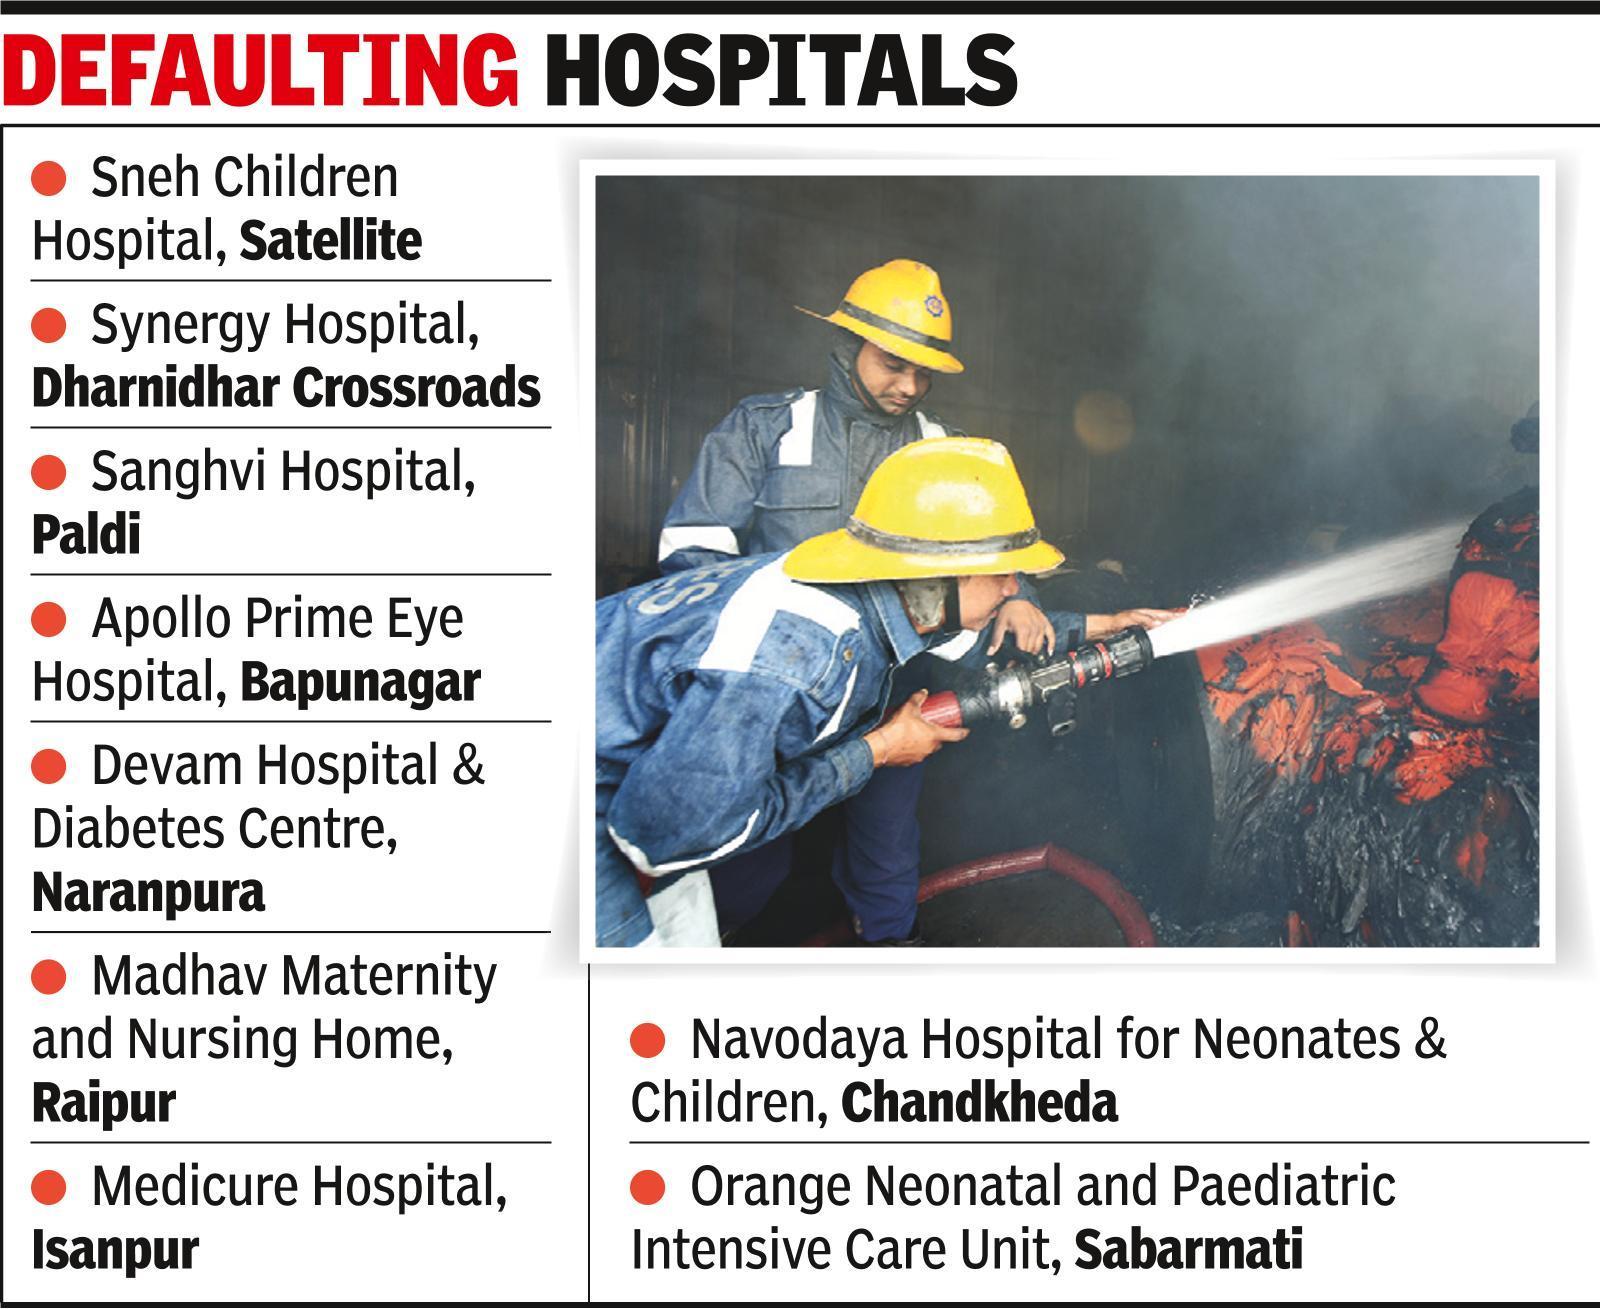 Ahmedabad: Fire safety NOCs of 9 hospitals lapse, closure notices issued